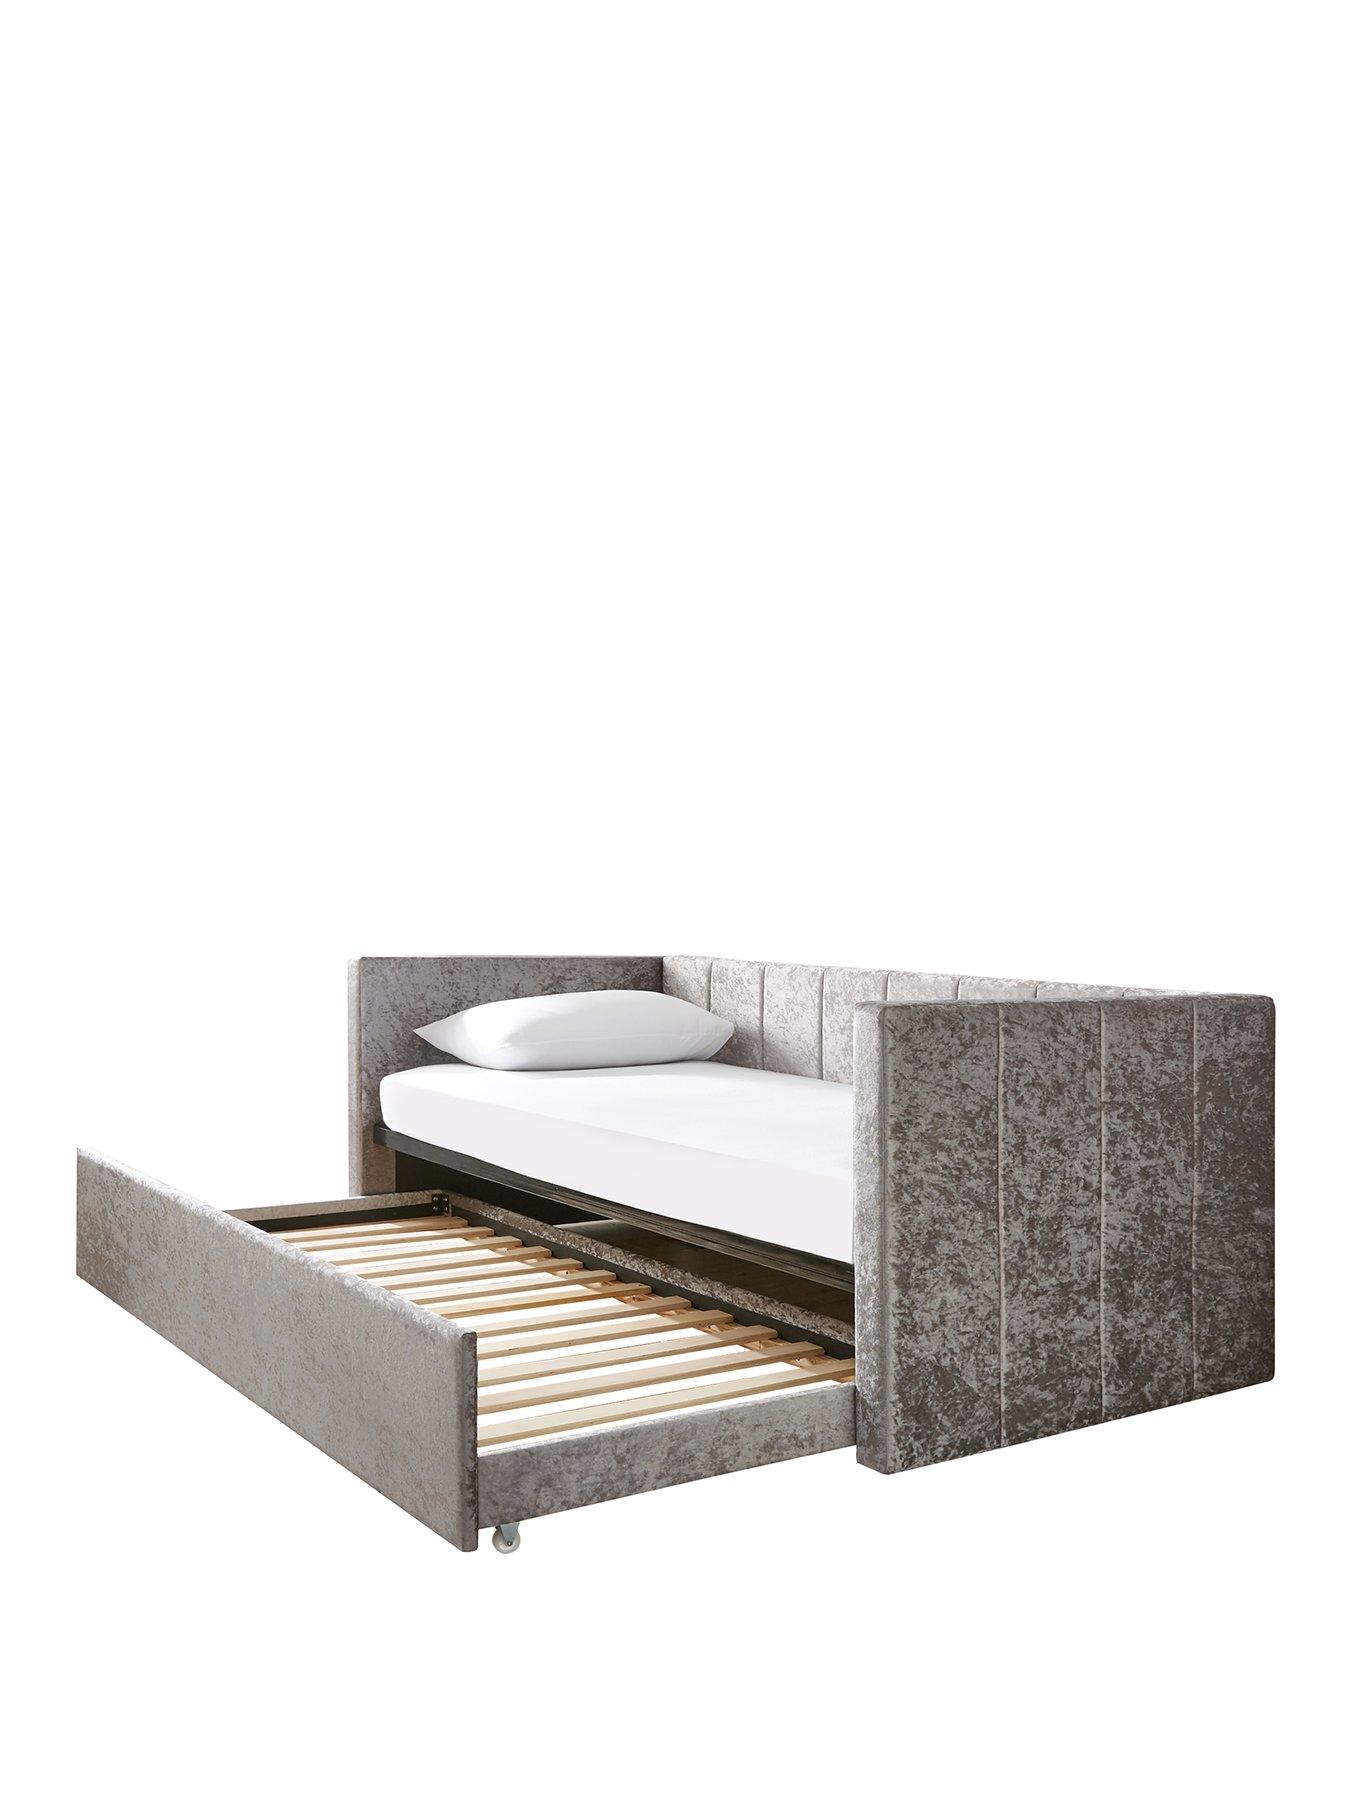 Connie Crushed Velvet Day Bed with Low Level Trundle and Mattress ...